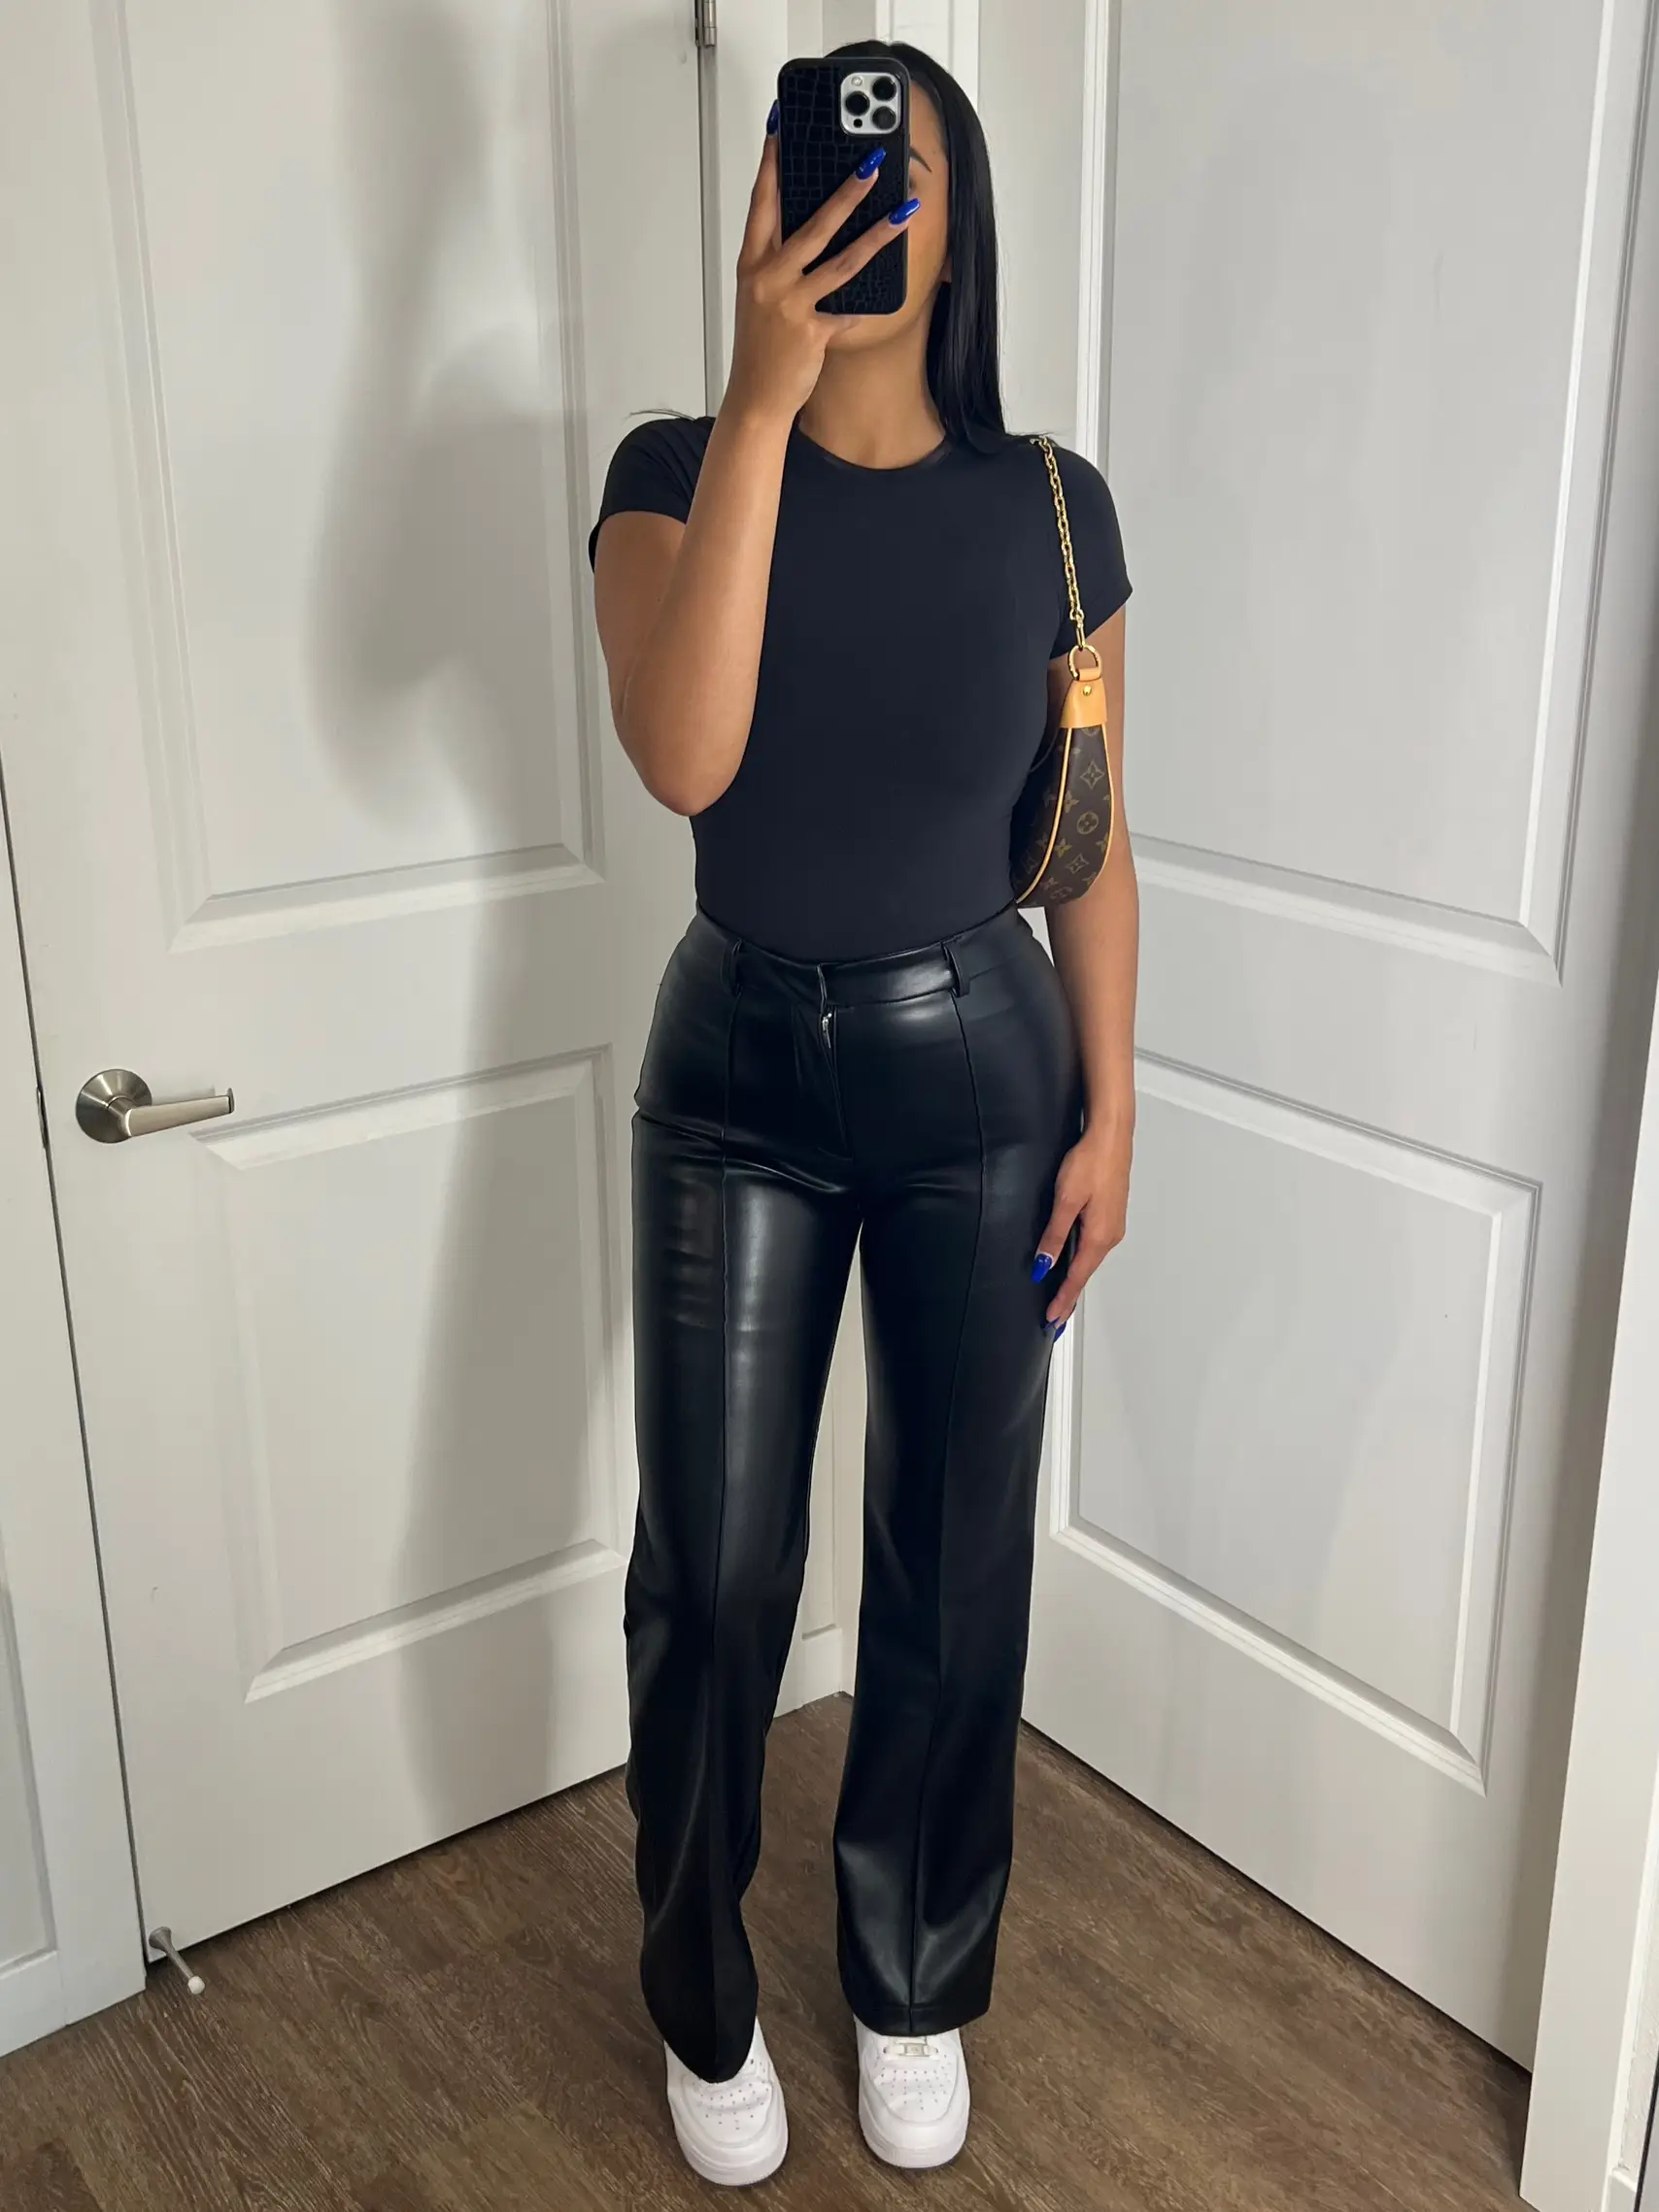 I wanna show off these leather pants all fall!! 🍂🧸 Outfit